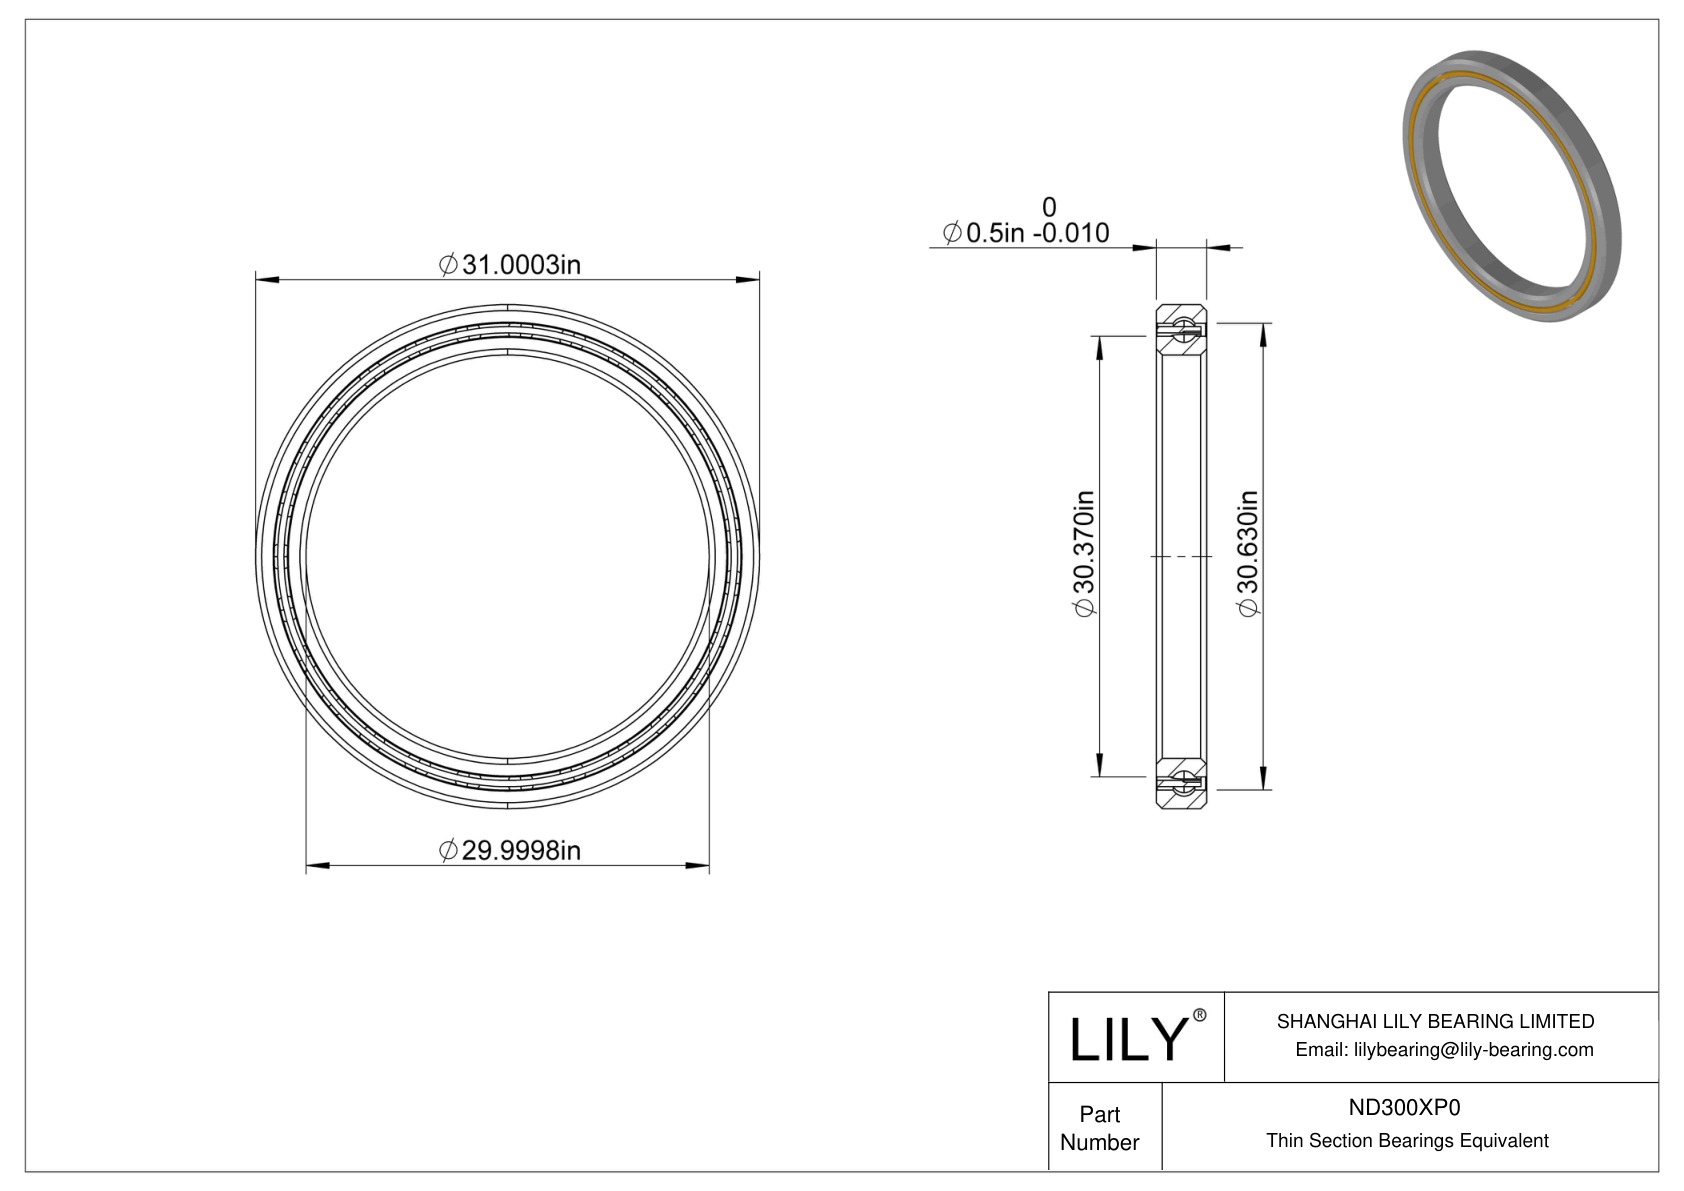 ND300XP0 Constant Section (CS) Bearings cad drawing